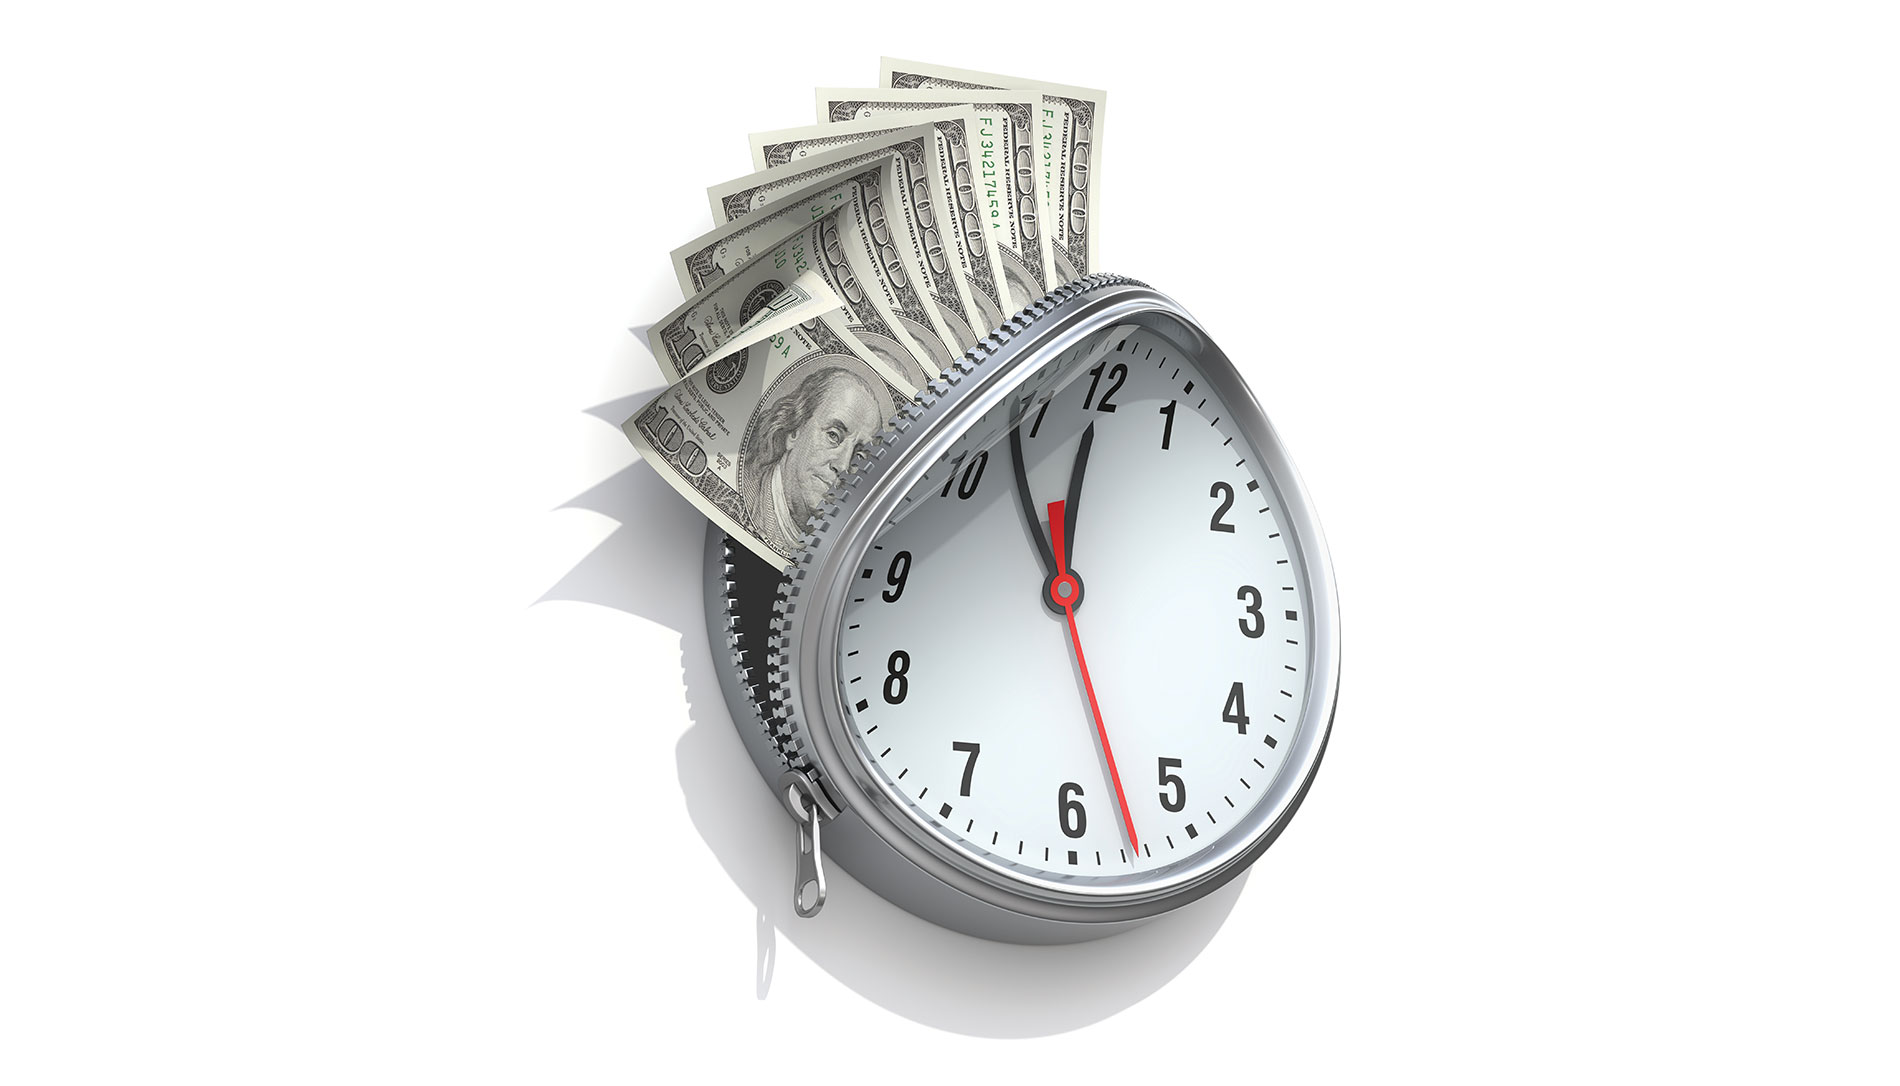 Illustration of hundred-dollar bills coming out of an unzipped clock. Image by stock.adobe.com / Mipan.